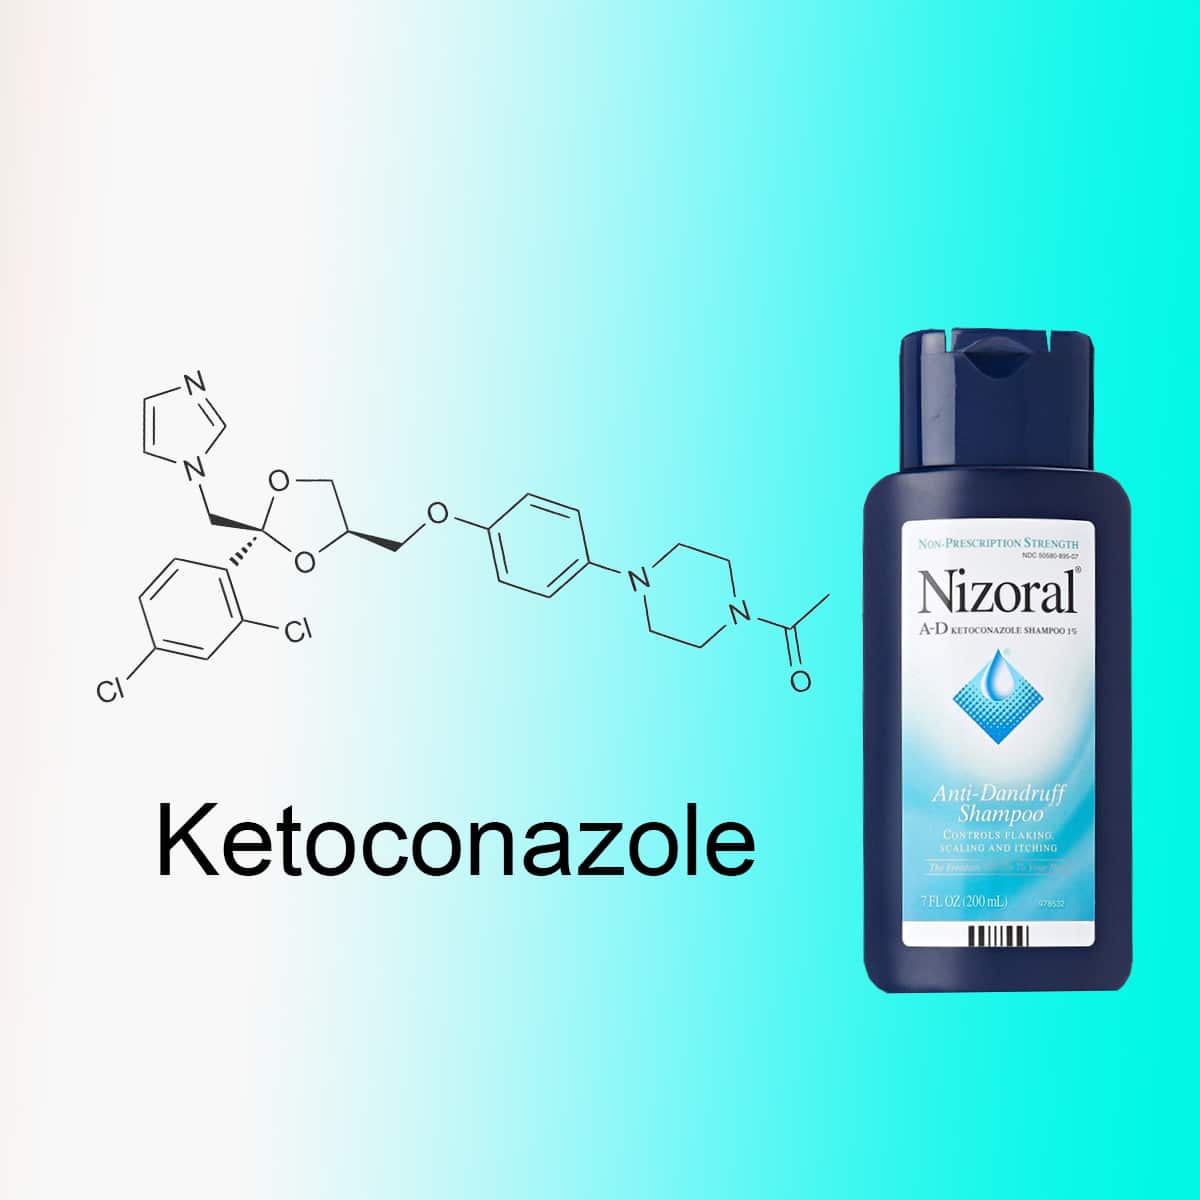 Ketoconazole for Hair Loss: How Effective is It? - Hairverse